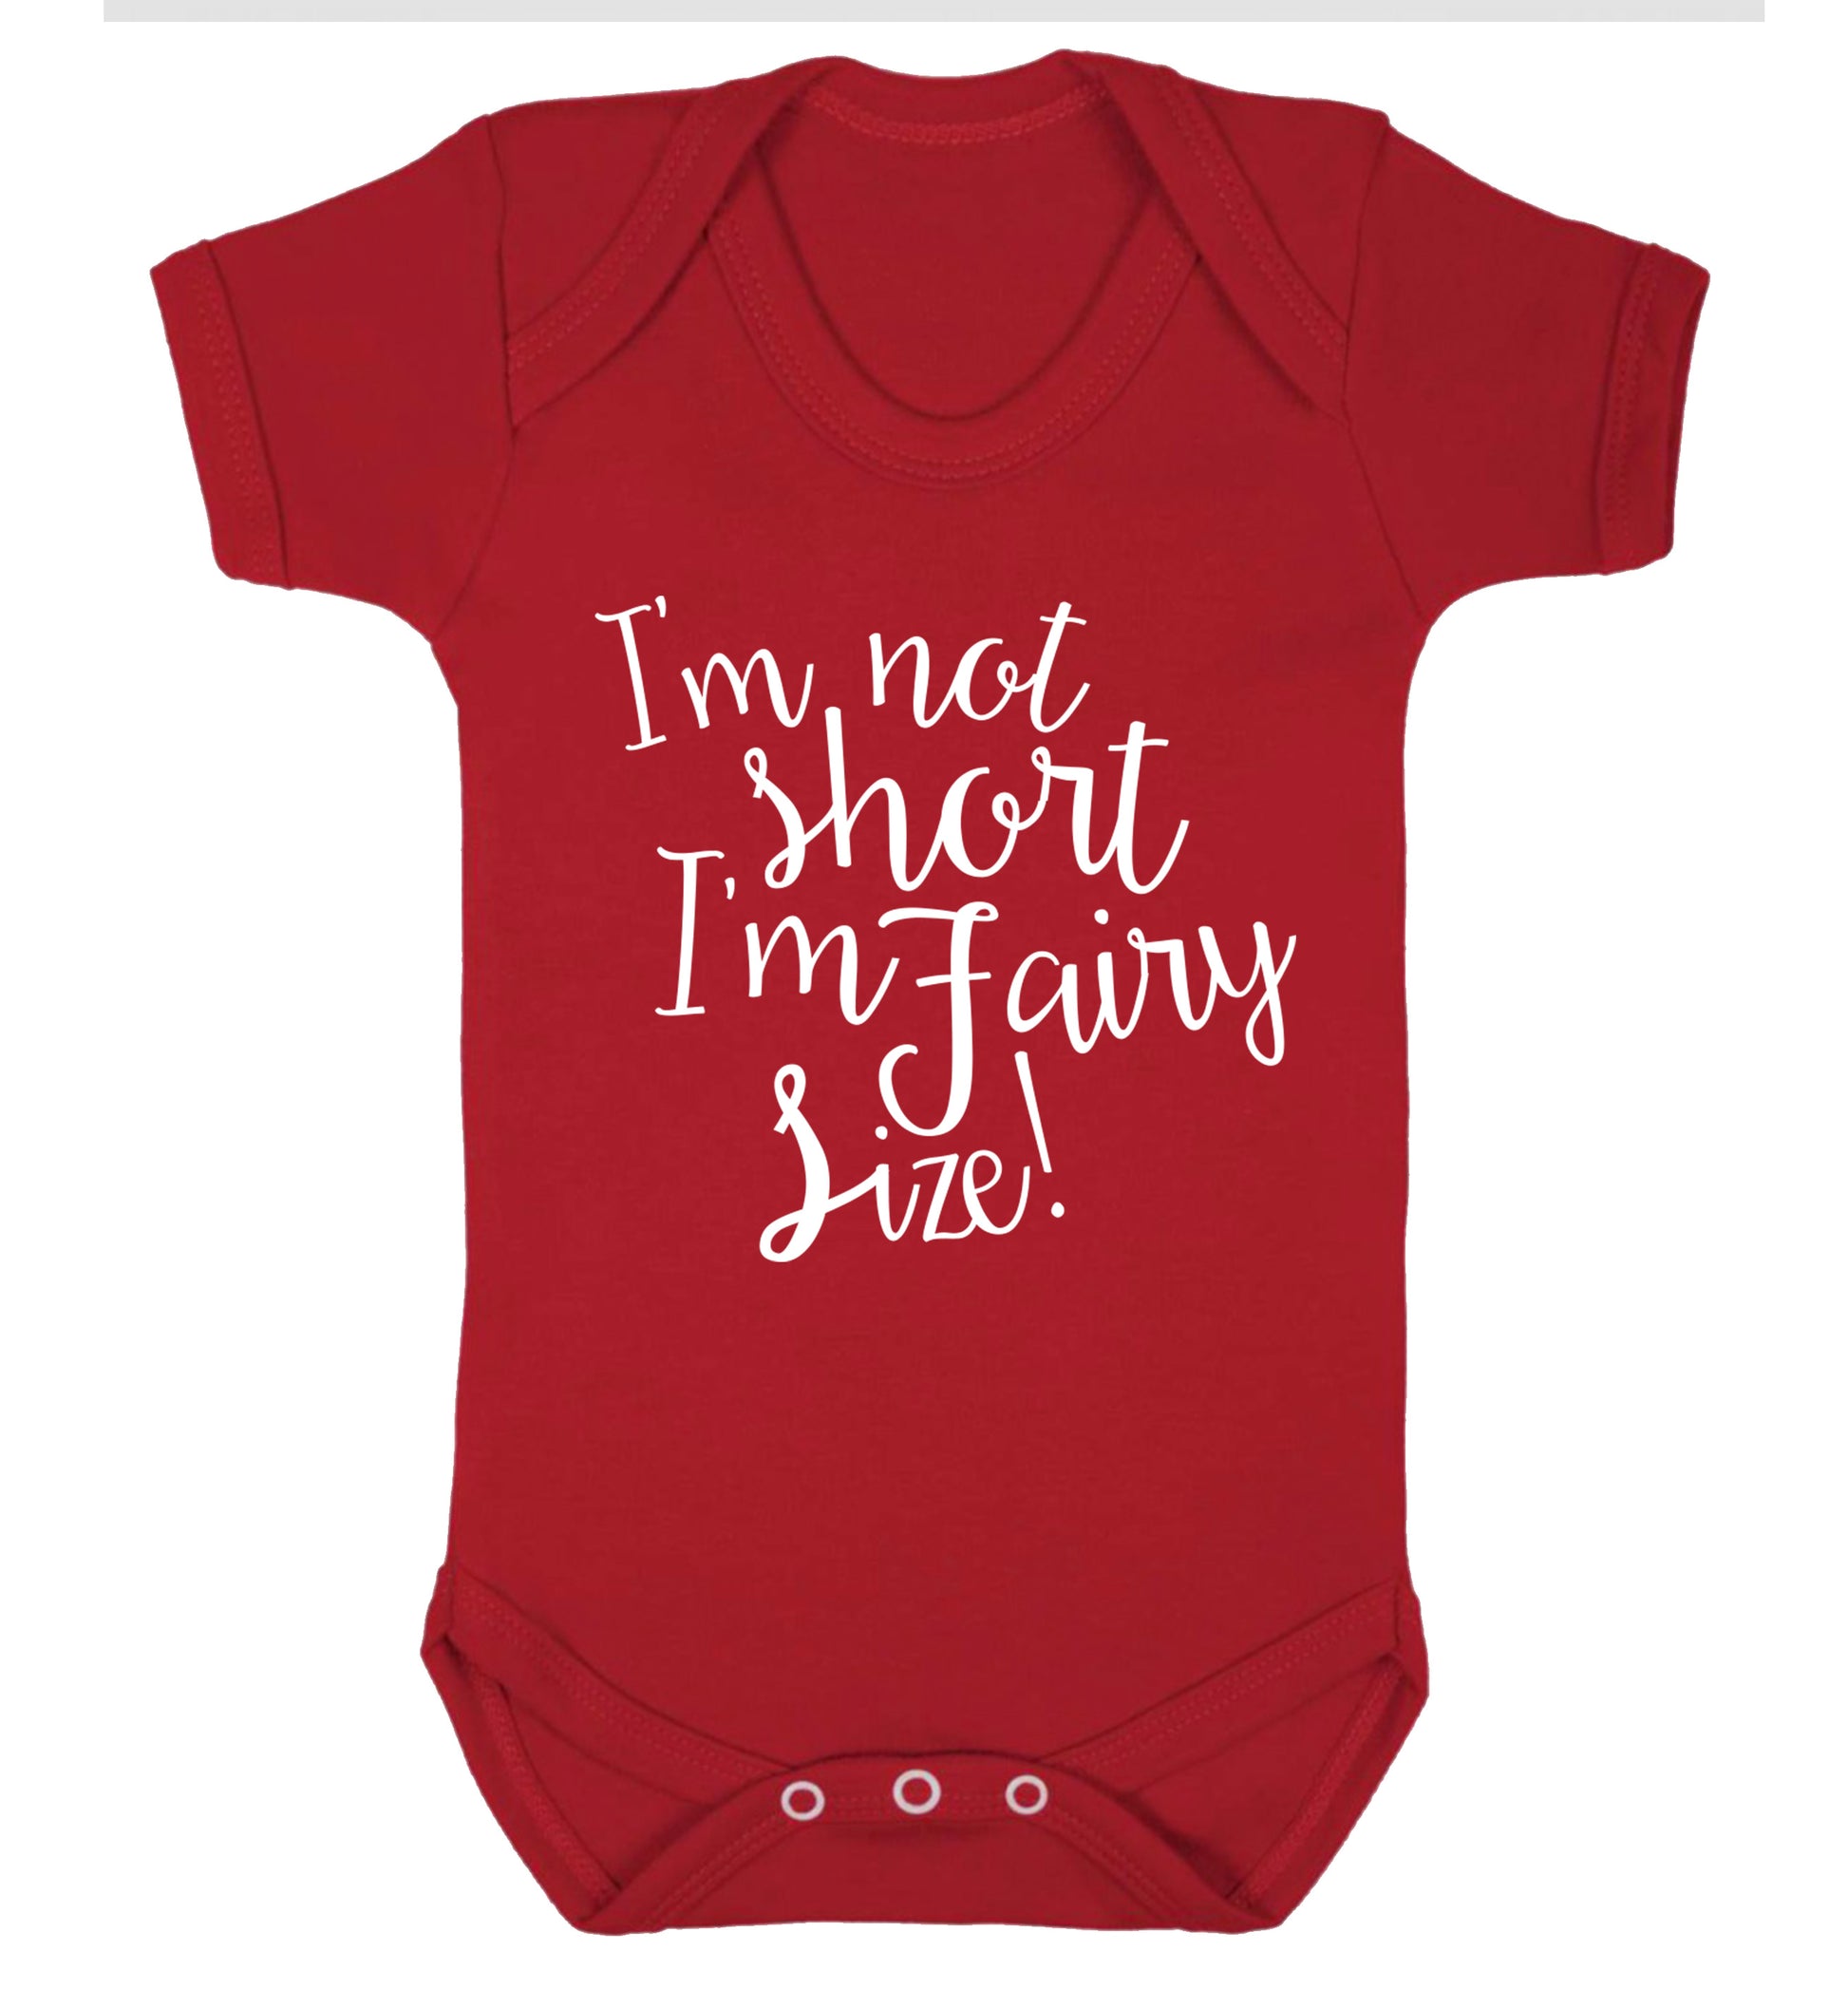 I'm not short I'm fairy sized! Baby Vest red 18-24 months